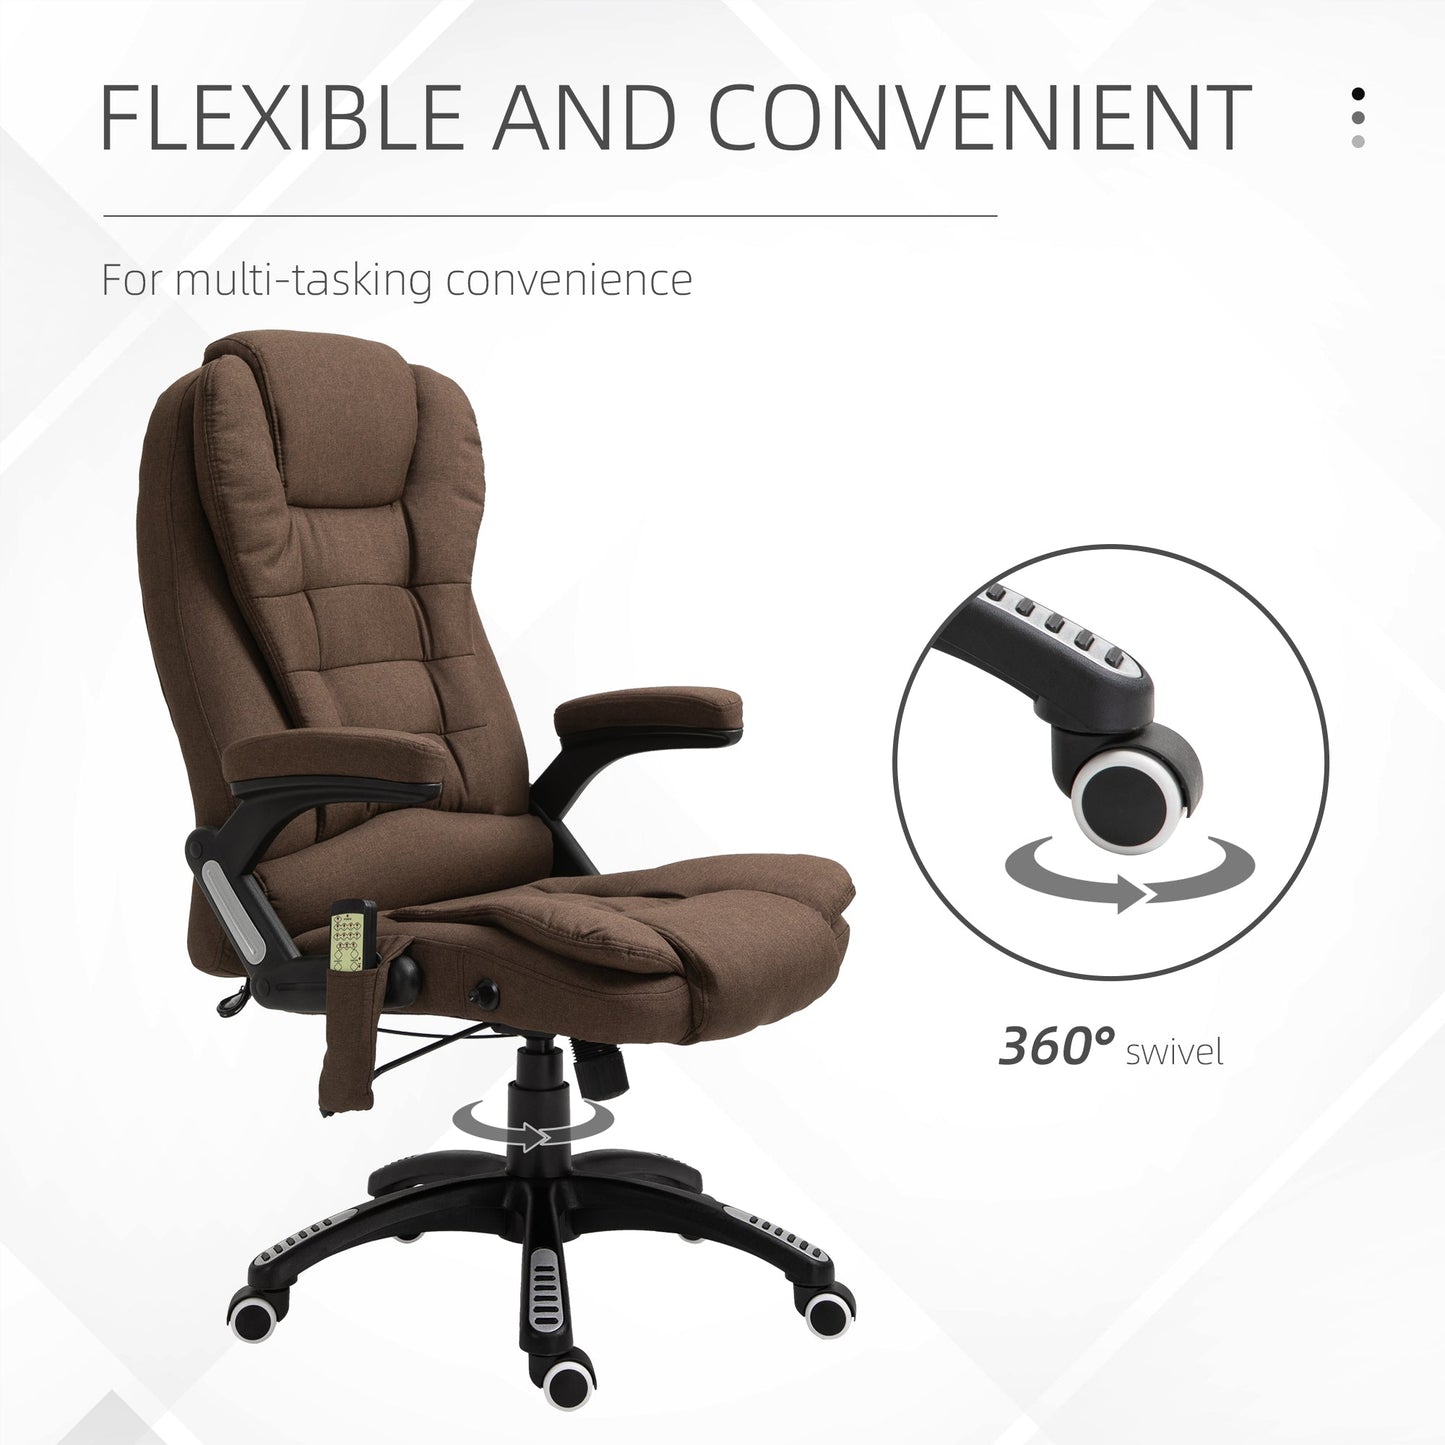 6 Point Vibrating Massage Office Chair High Back Executive Chair with Reclining Back, Swivel Wheels, Brown - Gallery Canada